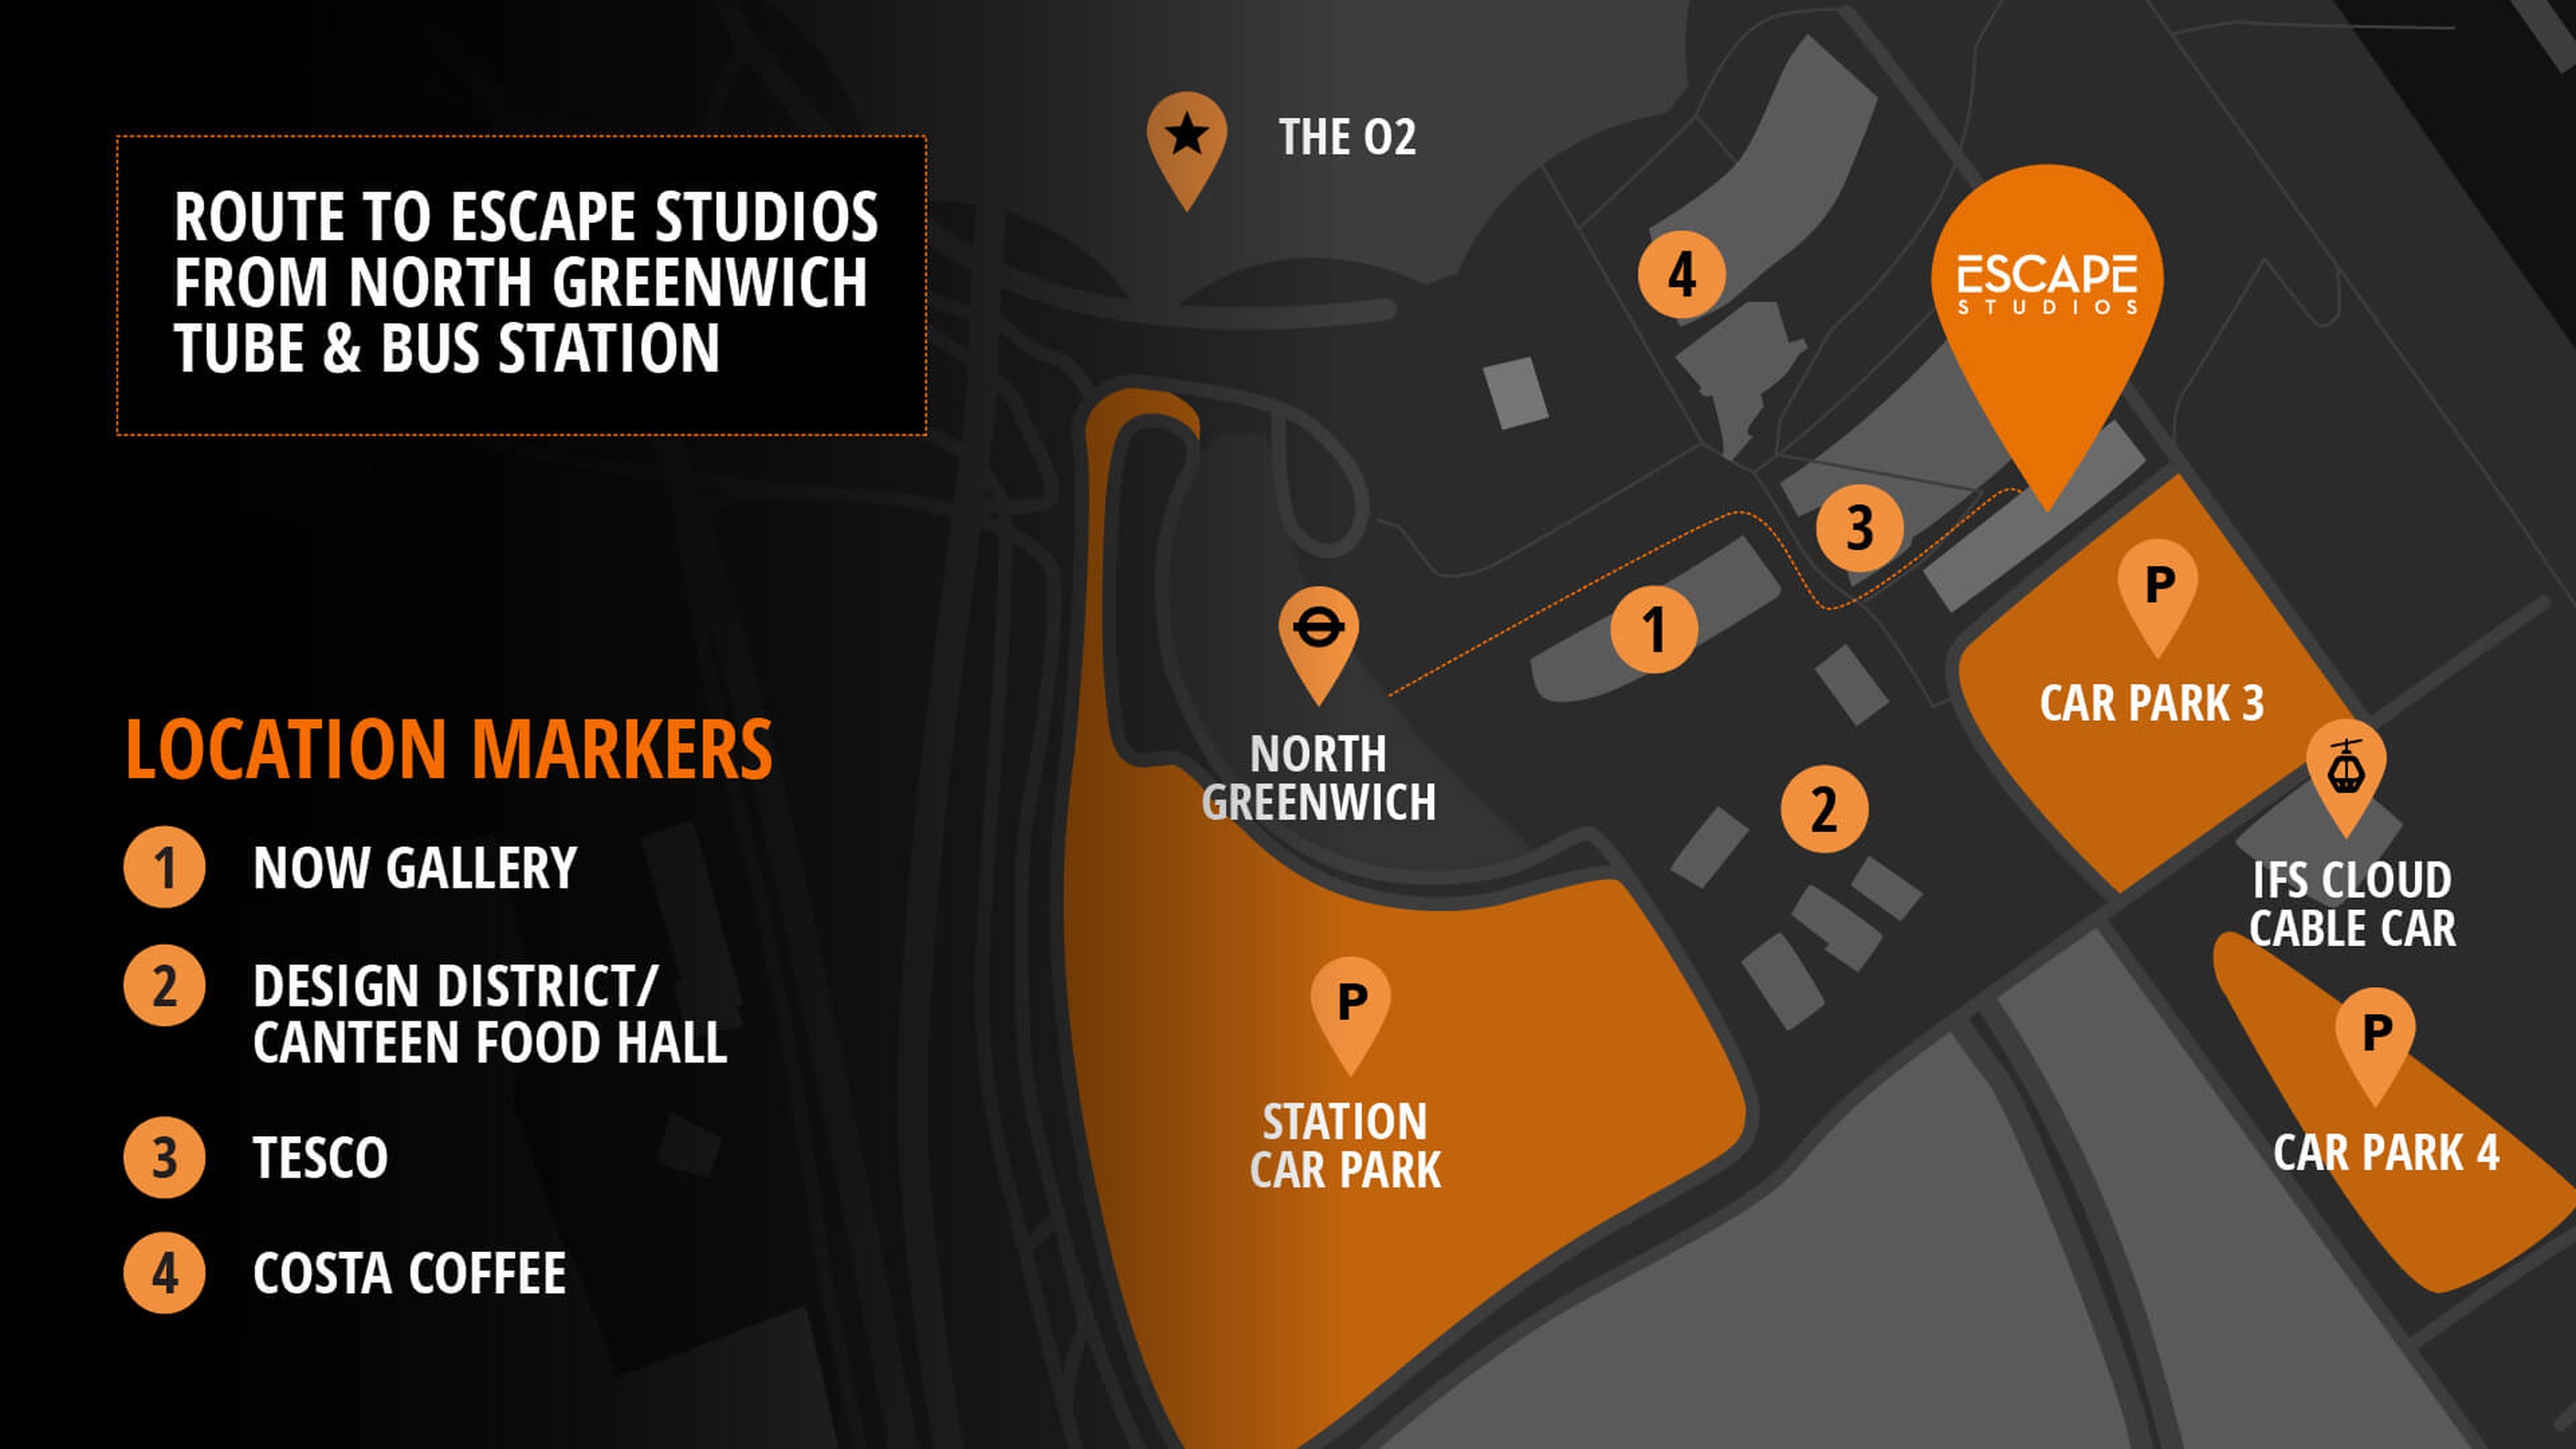 A map of the North Greenwich peninsula showing directions to Escape Studios from the Tube station and the surrounding car parks